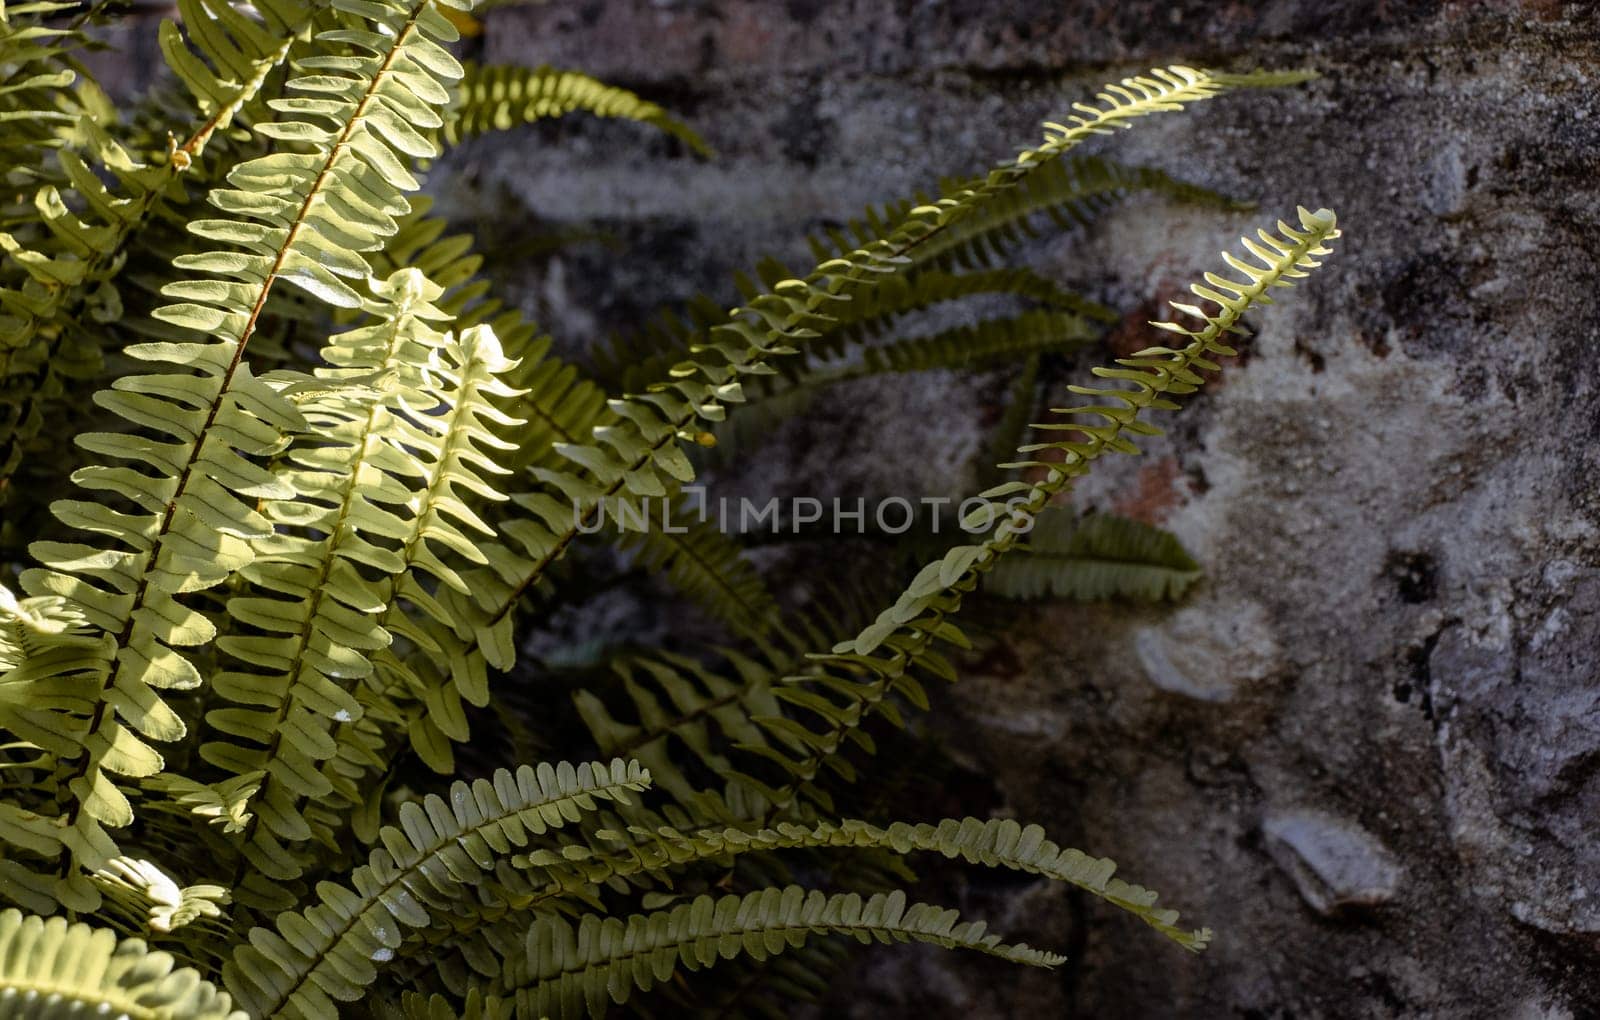 Green fern plants in garden landscape photo. Sunny ferns foliage background photography. Fresh green tropical foliage. Natural fern leaves in evening forest photography. High quality picture for wallpaper, travel blog.